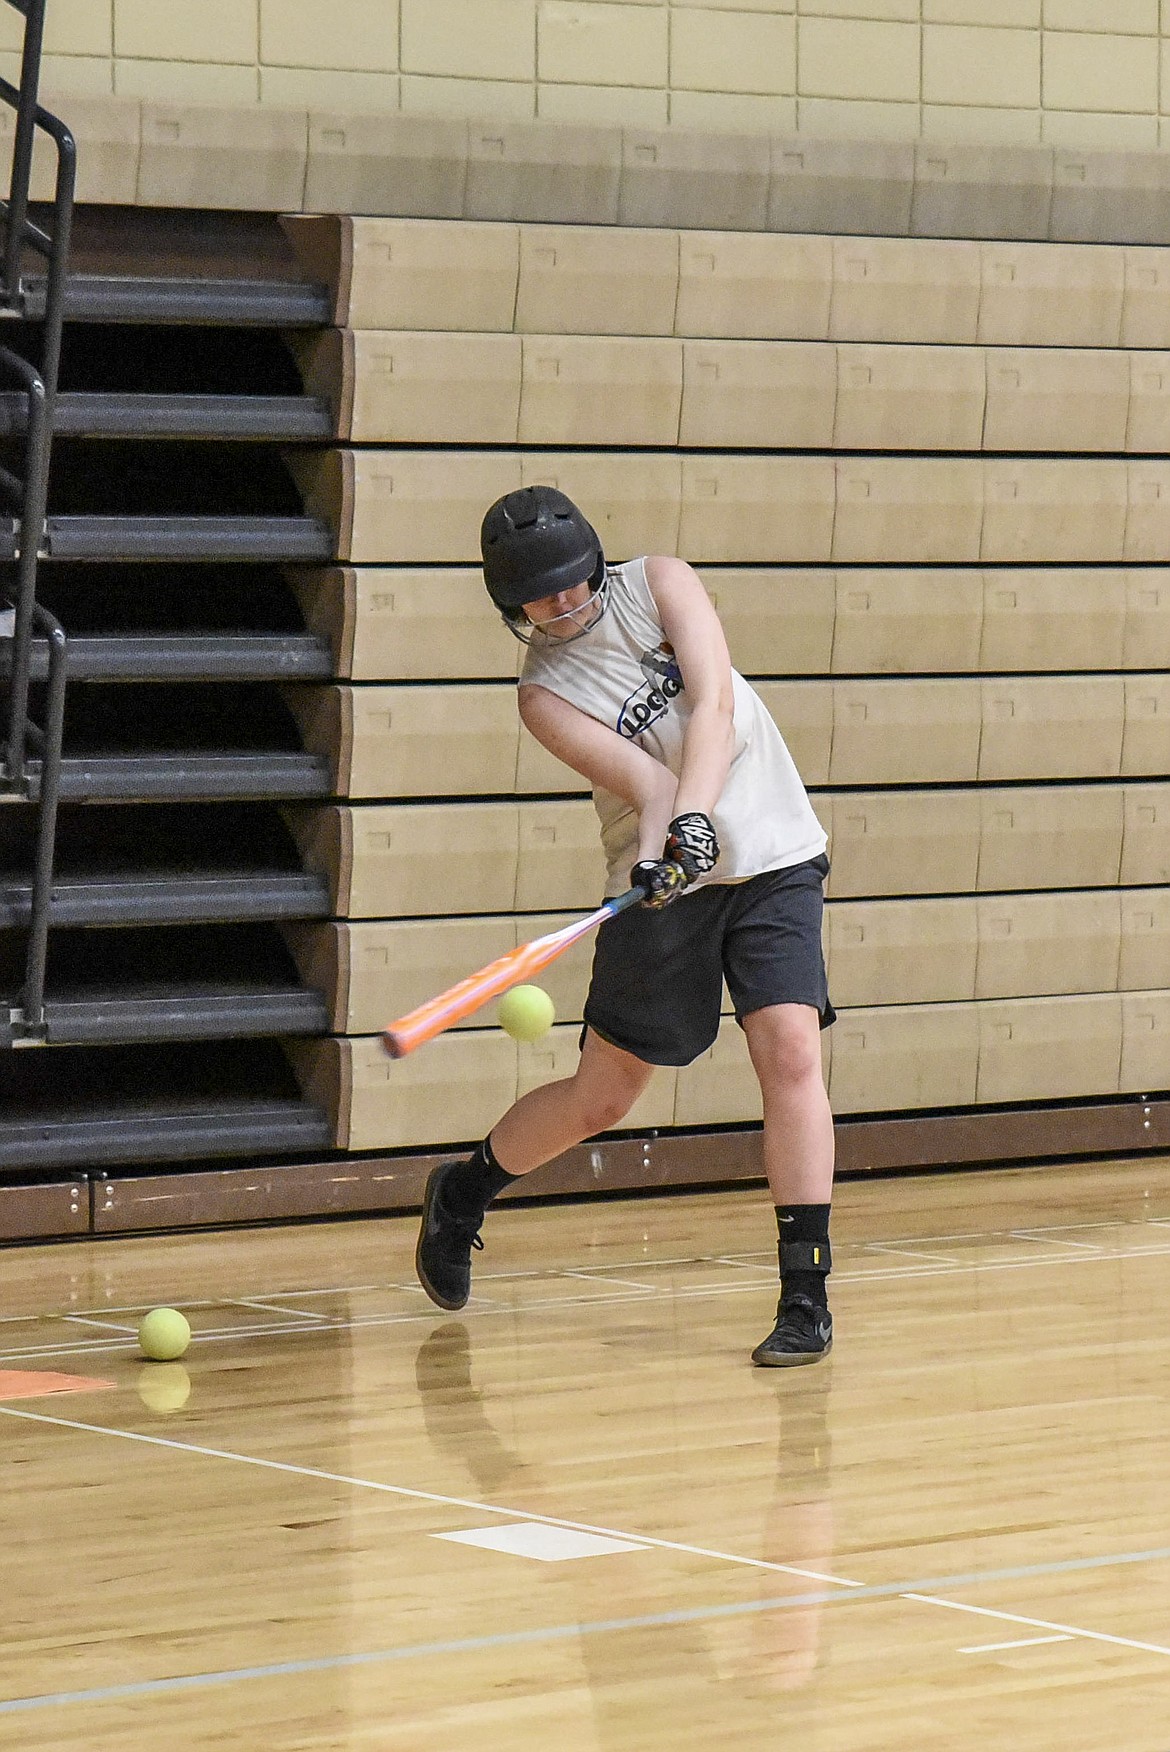 Libby sophomore makes contact during indoor softball practice in the Ralph Tate Memorial Gym Tuesday. (Ben Kibbey/The Western News)